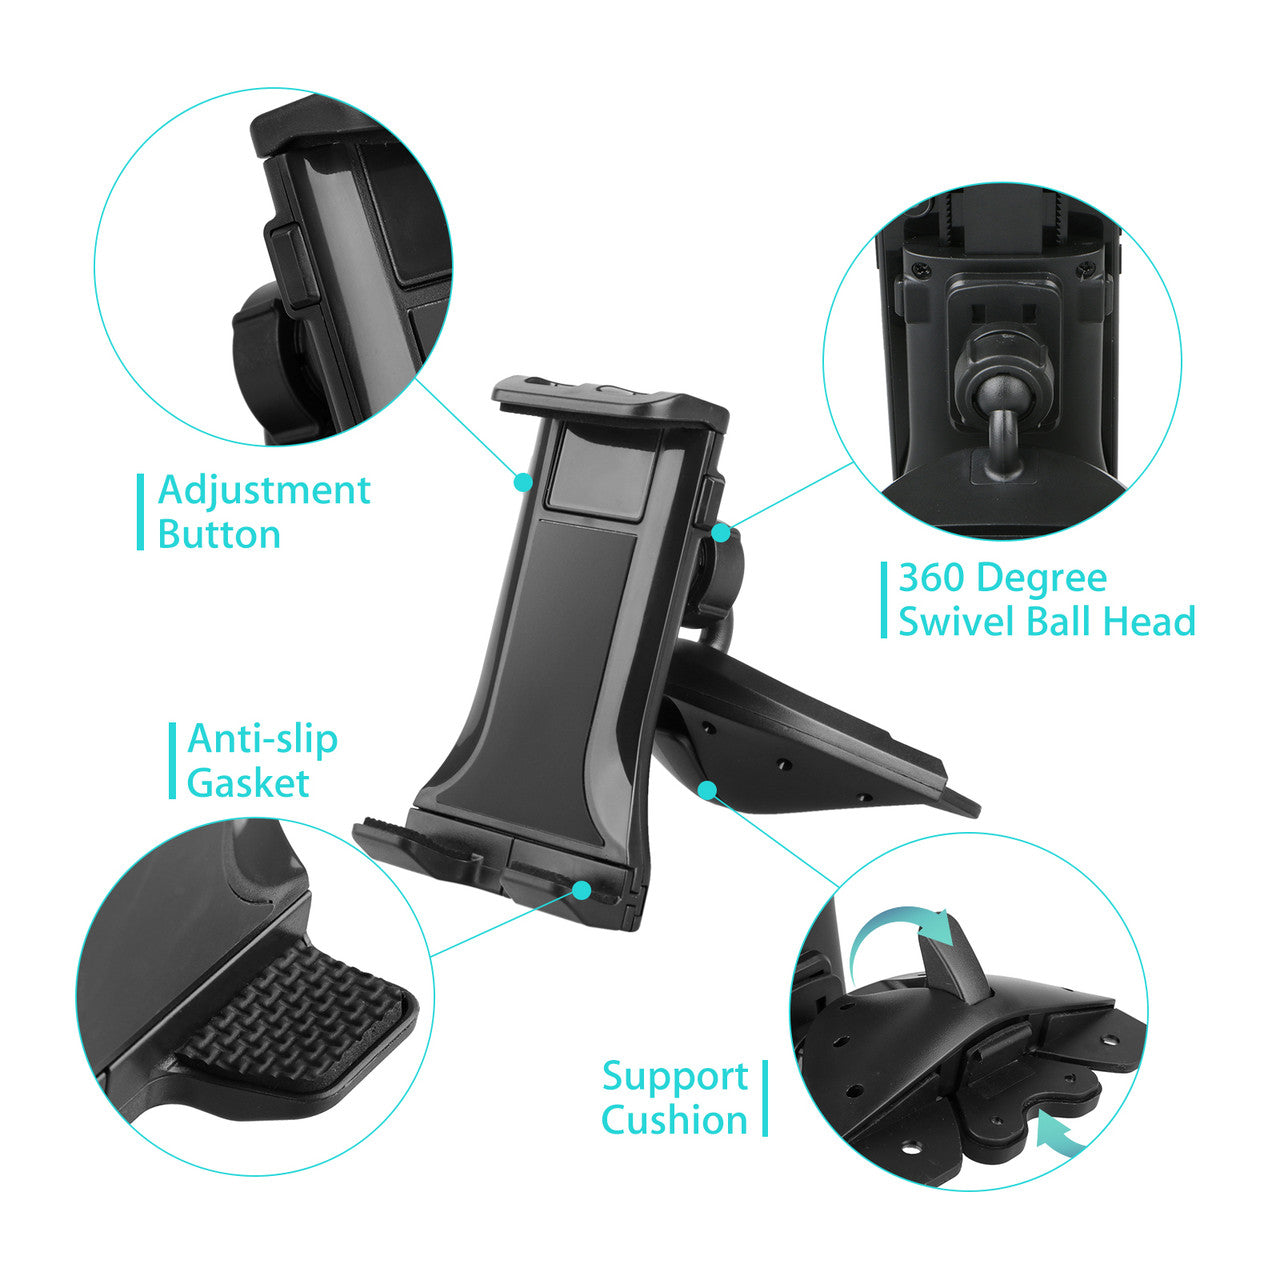 Universal Car CD Slot Mount, Adjustable Tablet Phone Mount Holder for 7"-12" Devices iPad 2/3/4/5, Samsung Galaxy Tab 3/4/A/S, Garmin GPS, Other Table Device